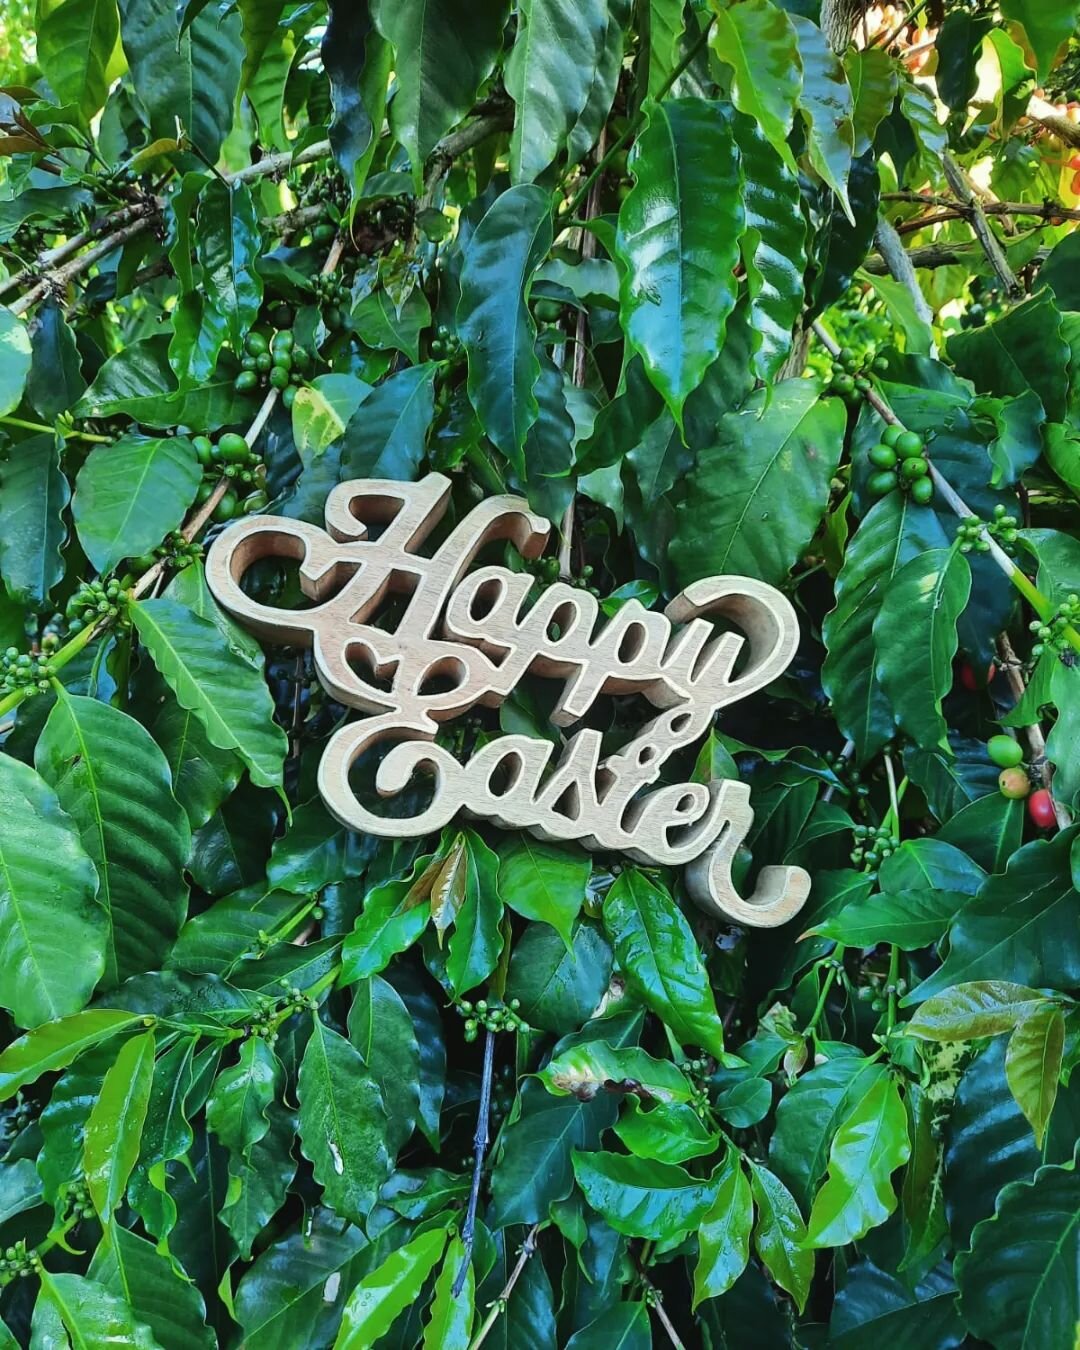 May you have a blessed Easter Sunday. Wishing you much Aloha from our family to yours. ❤️

#alohastarcoffee #alohastarcoffeefarms #happyeaster #easter #easter2023 #hawaii #kona #hawaiianislands #springishere #spring2023 #eastersunday #aloha #konacoff